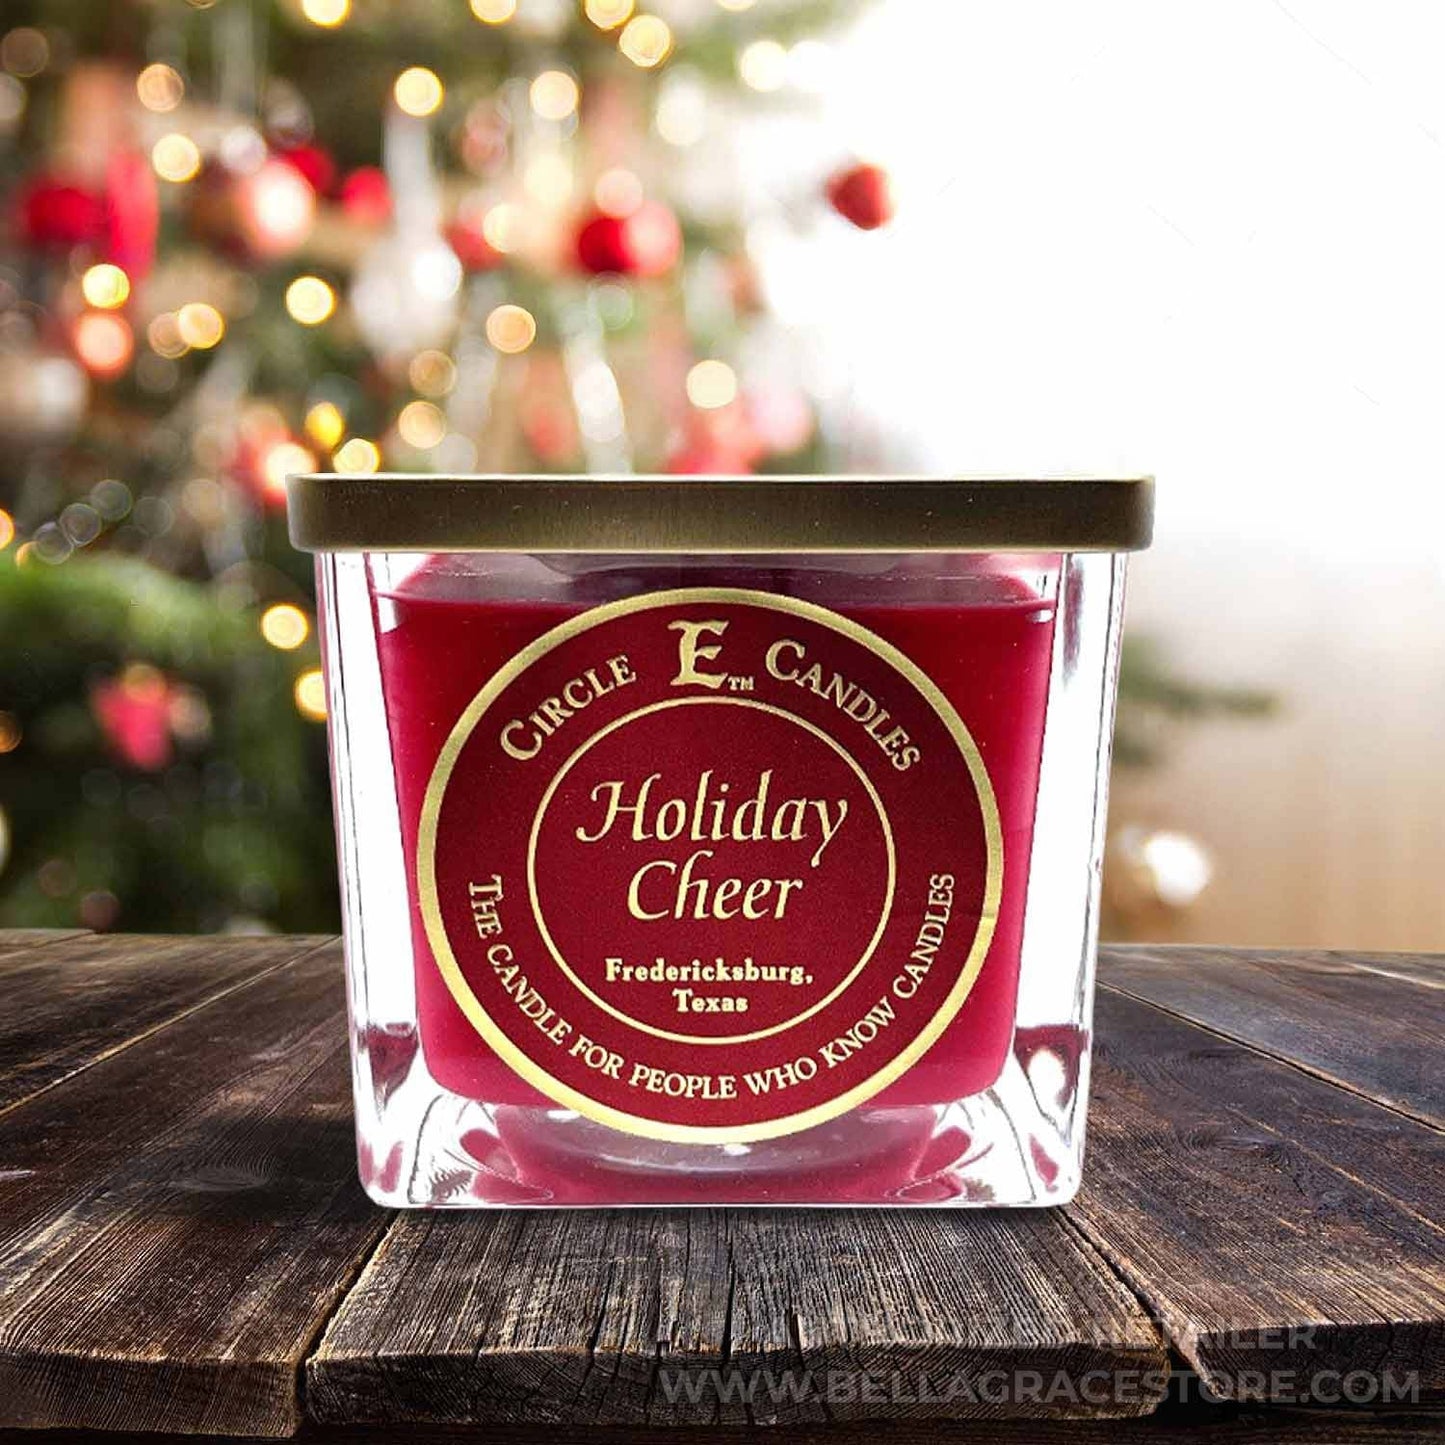 Circle E Candles, Holiday Cheer Scent, Large Size Jar Candle, 43oz, 4 Wicks